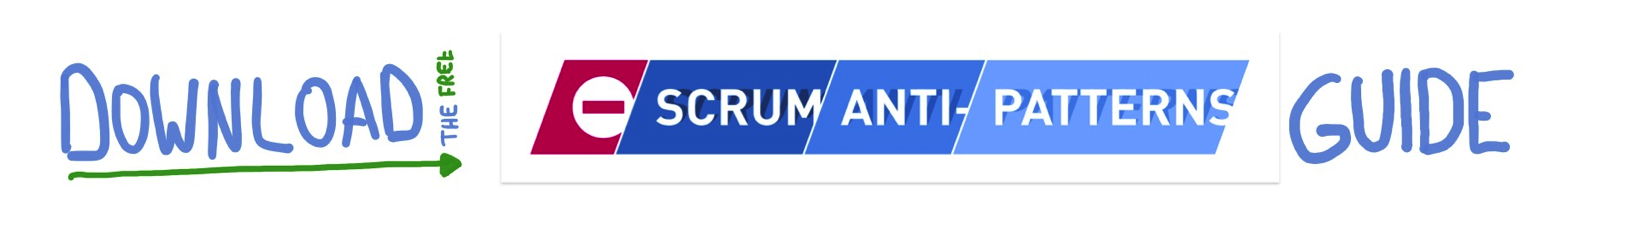 Download the Scrum-Anti-Patterns Guide